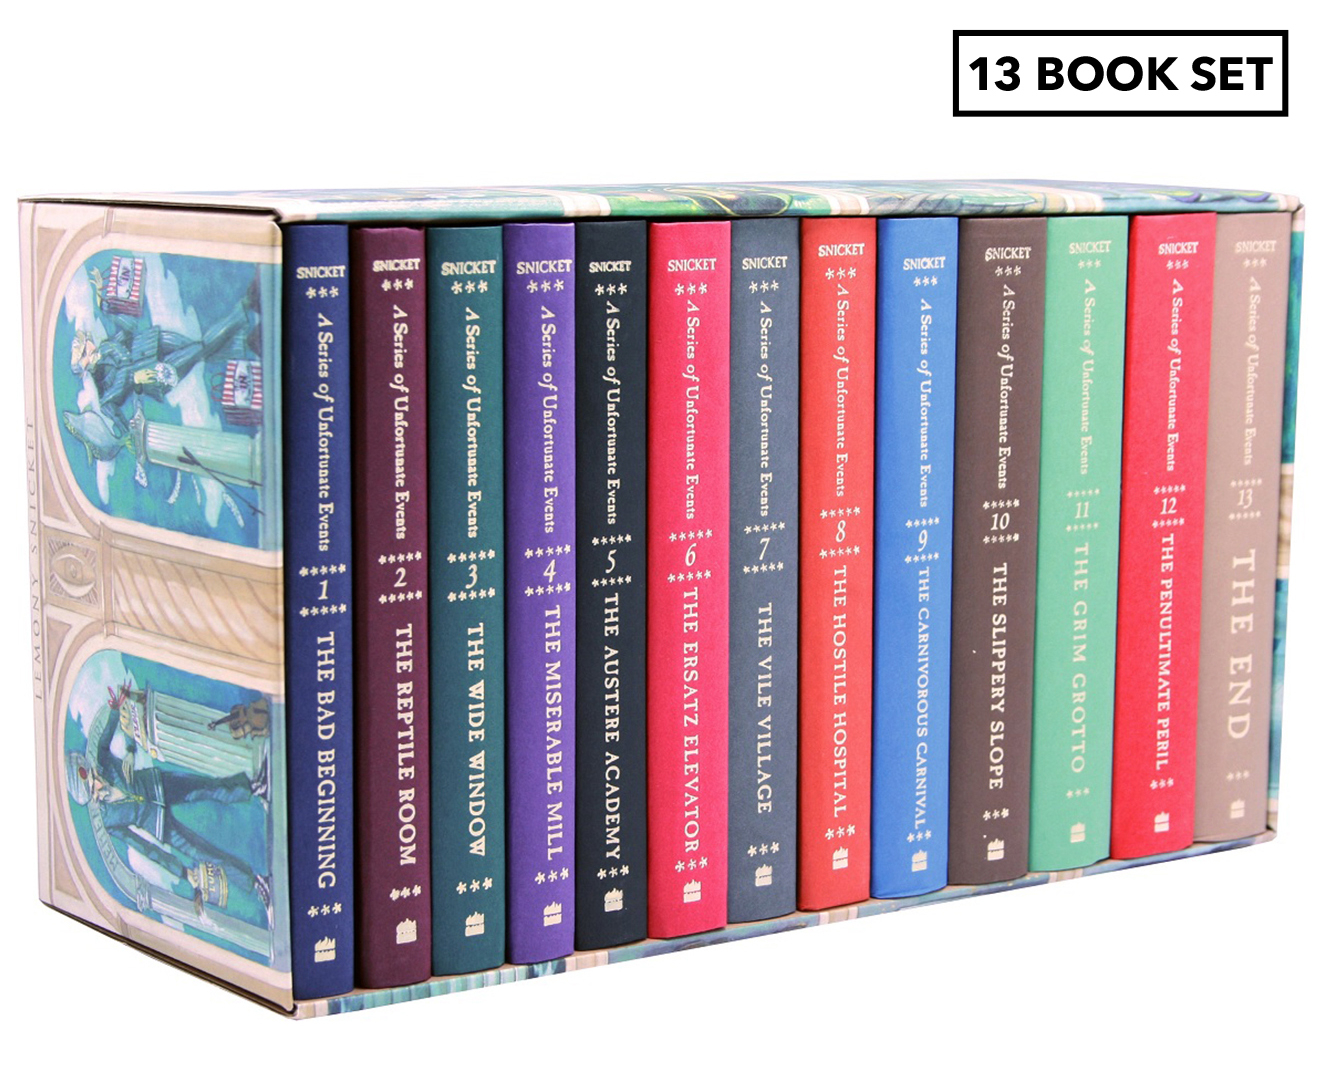 Lemony Snicket's A Series of Unfortunate Events 13Book Box Set Catch